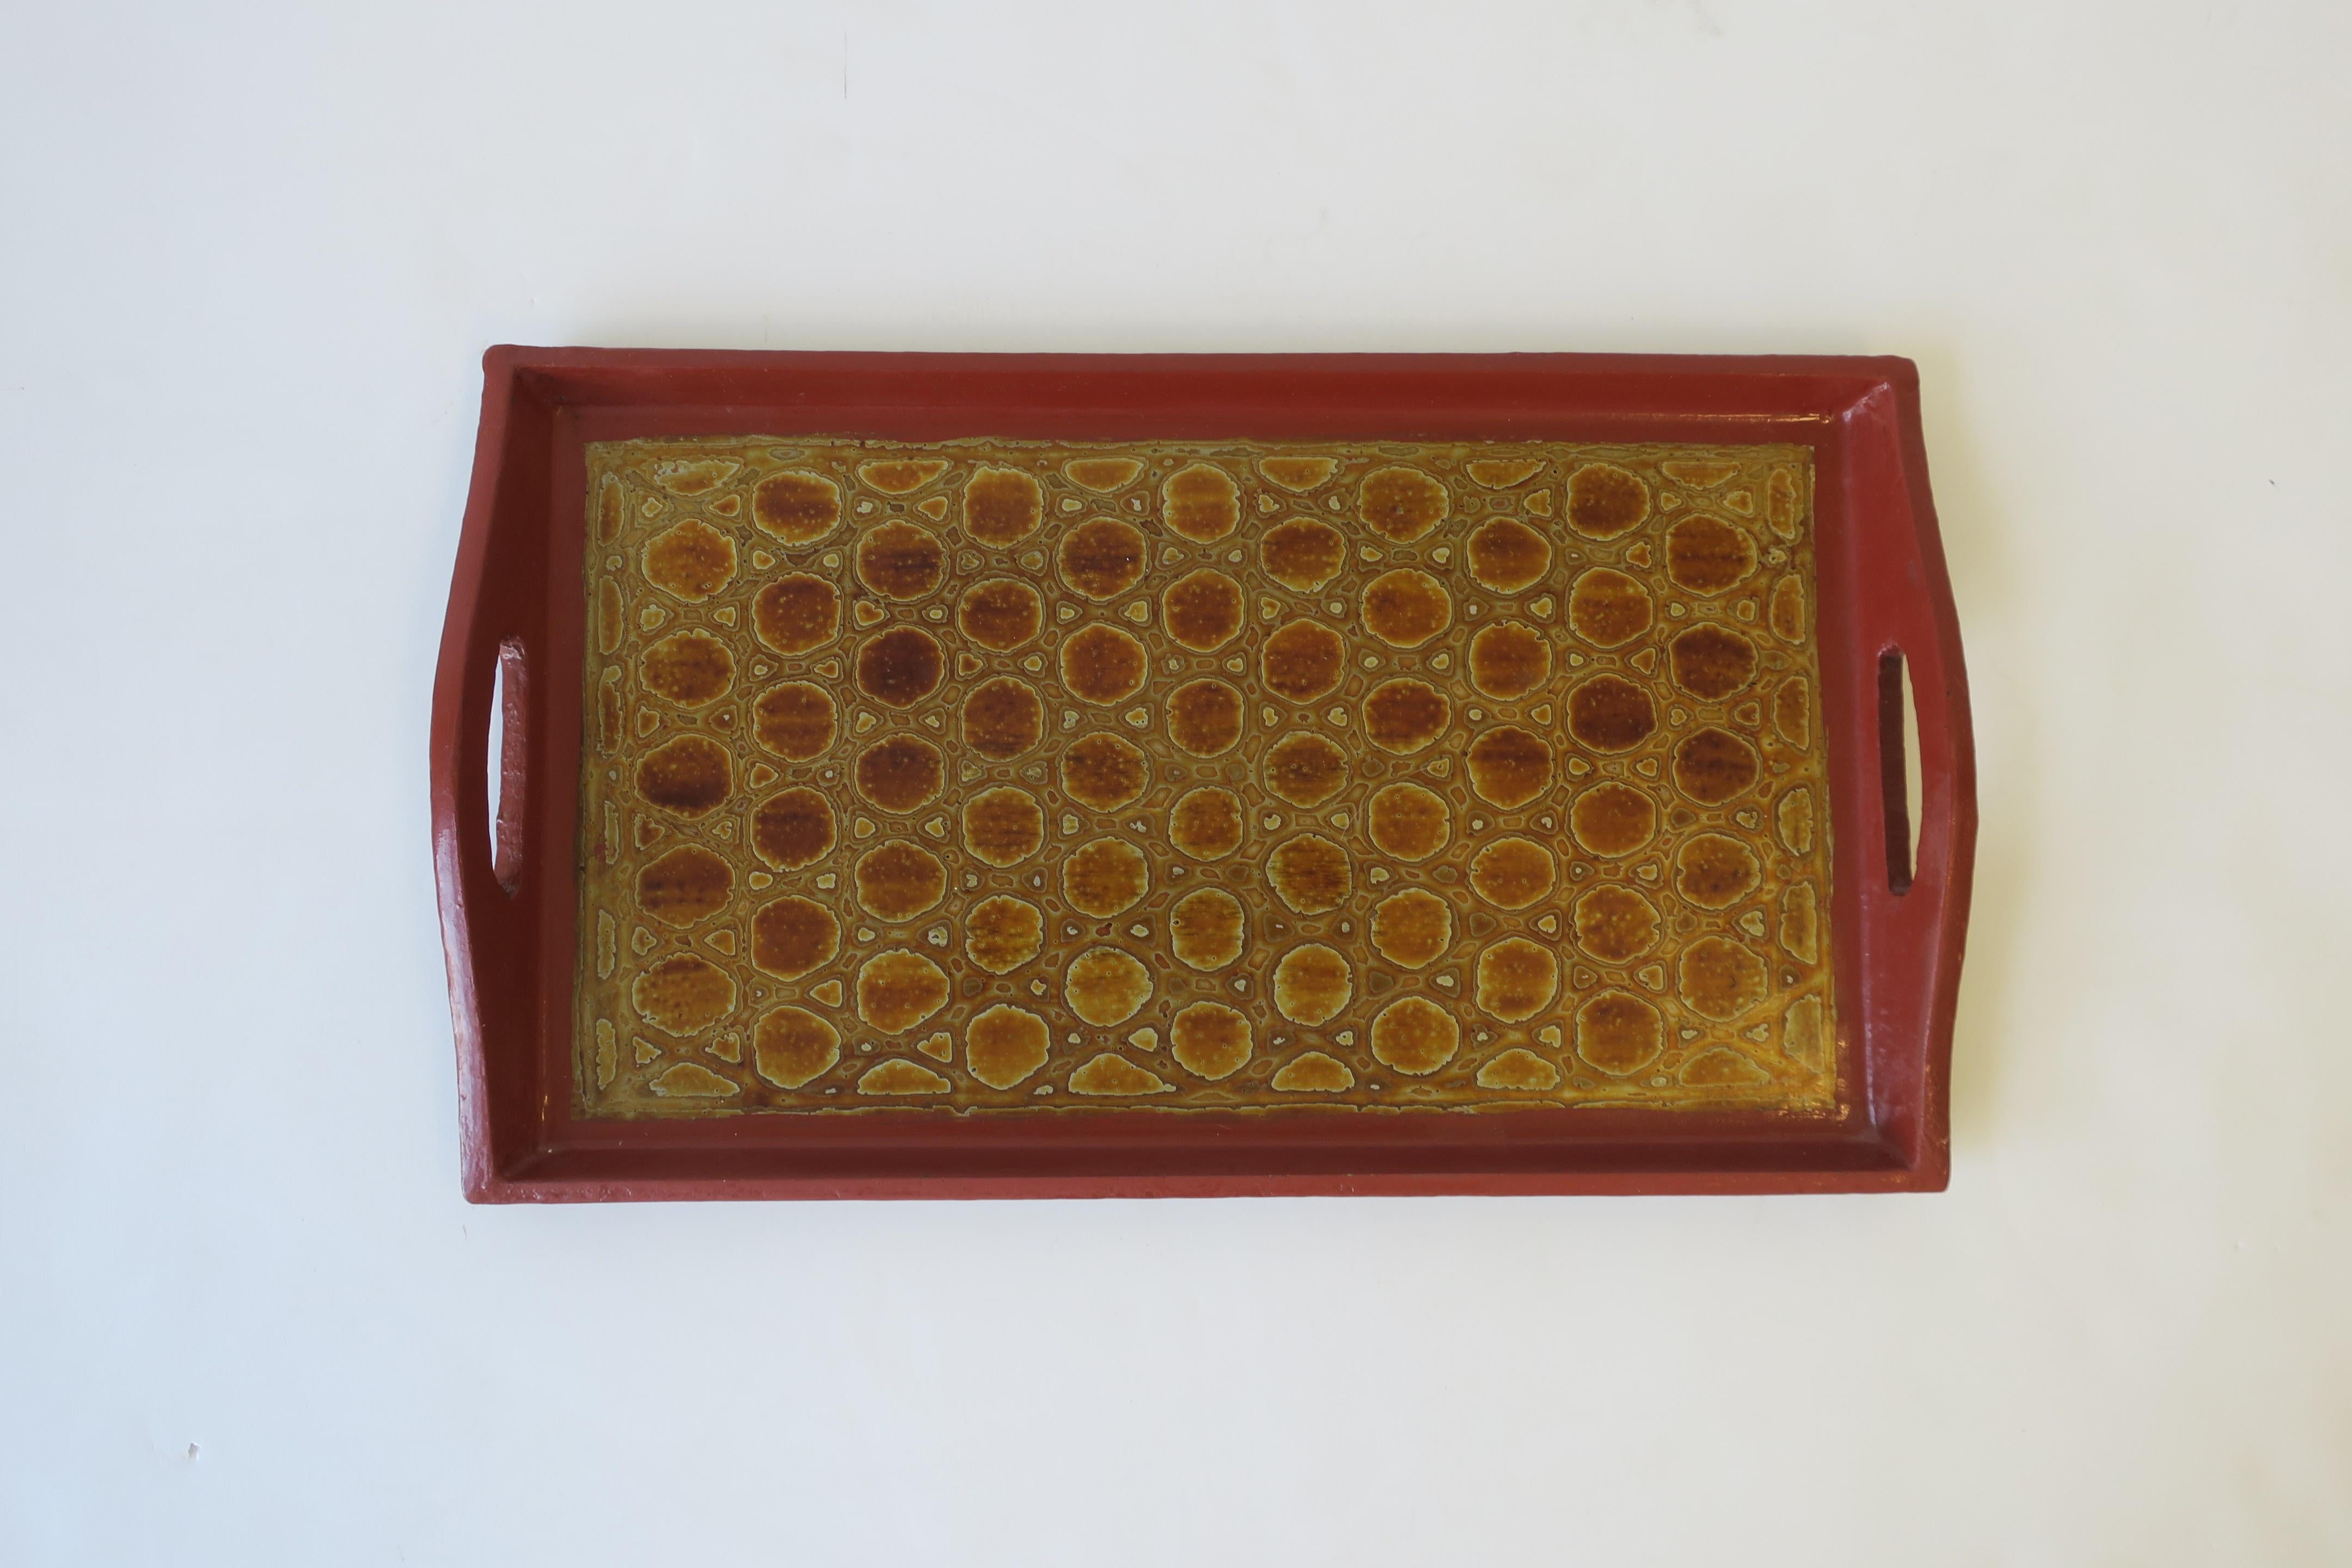 A chic red burgundy terracotta, gold and black lacquer rectangular serving tray with handles. Tray has a gold iridescence reptile (crocodile or alligator) like design.

Piece measures: 8.38